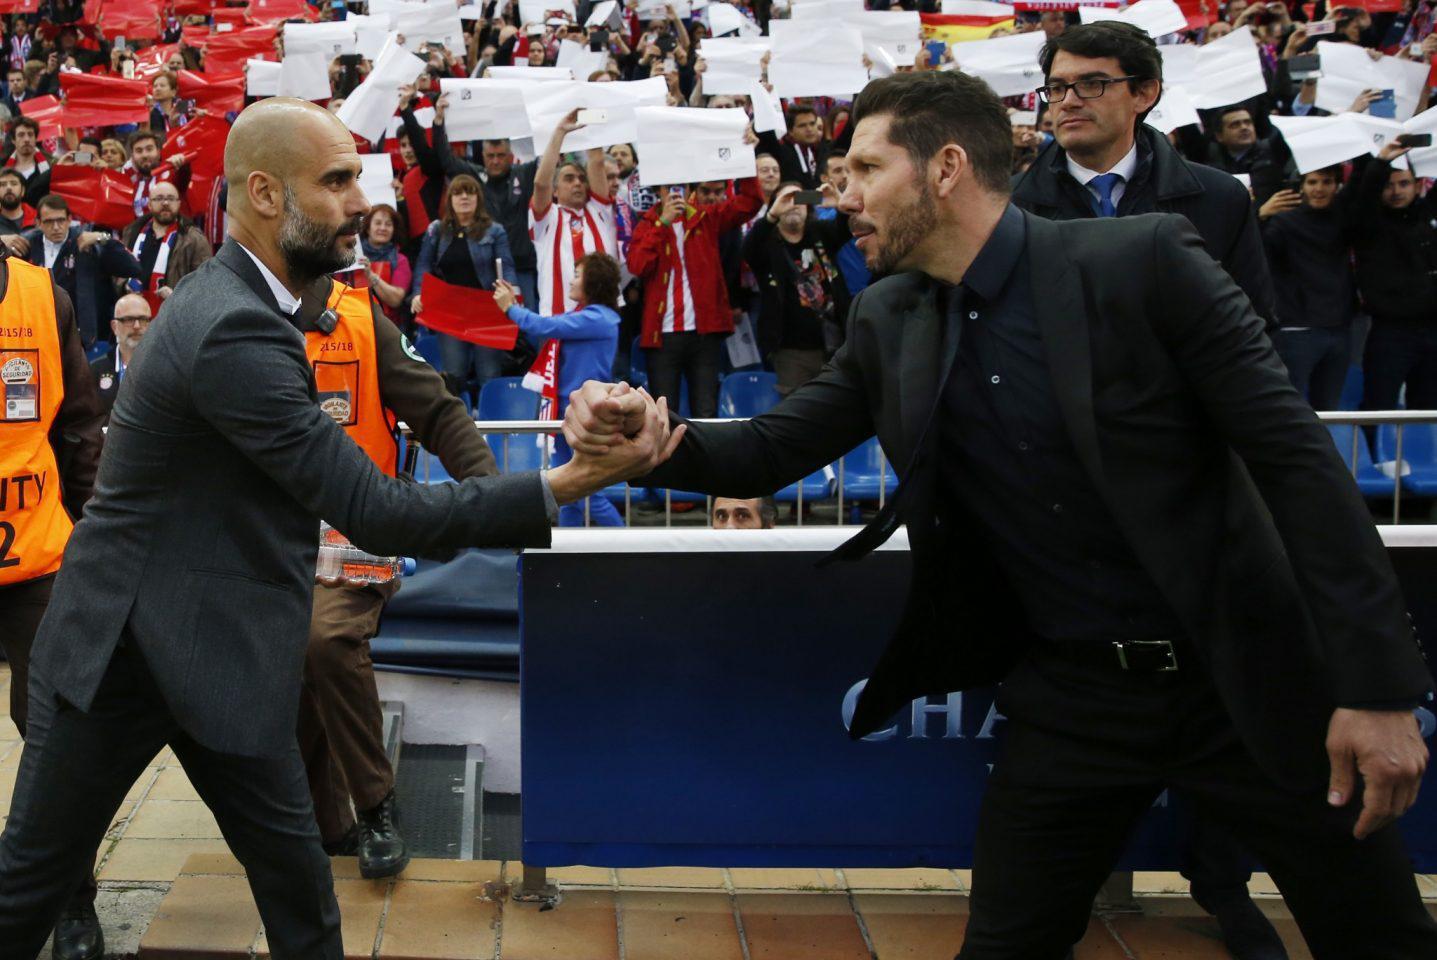 Football Soccer - Atletico Madrid v Bayern Munich - UEFA Champions League Semi Final First Leg - Vicente Calderon Stadium - 27/4/16 Bayern Munich coach Josep Guardiola shakes hands with Atletico Madrid coach Diego Simeone before the match Reuters / Sergio Perez Livepic EDITORIAL USE ONLY.